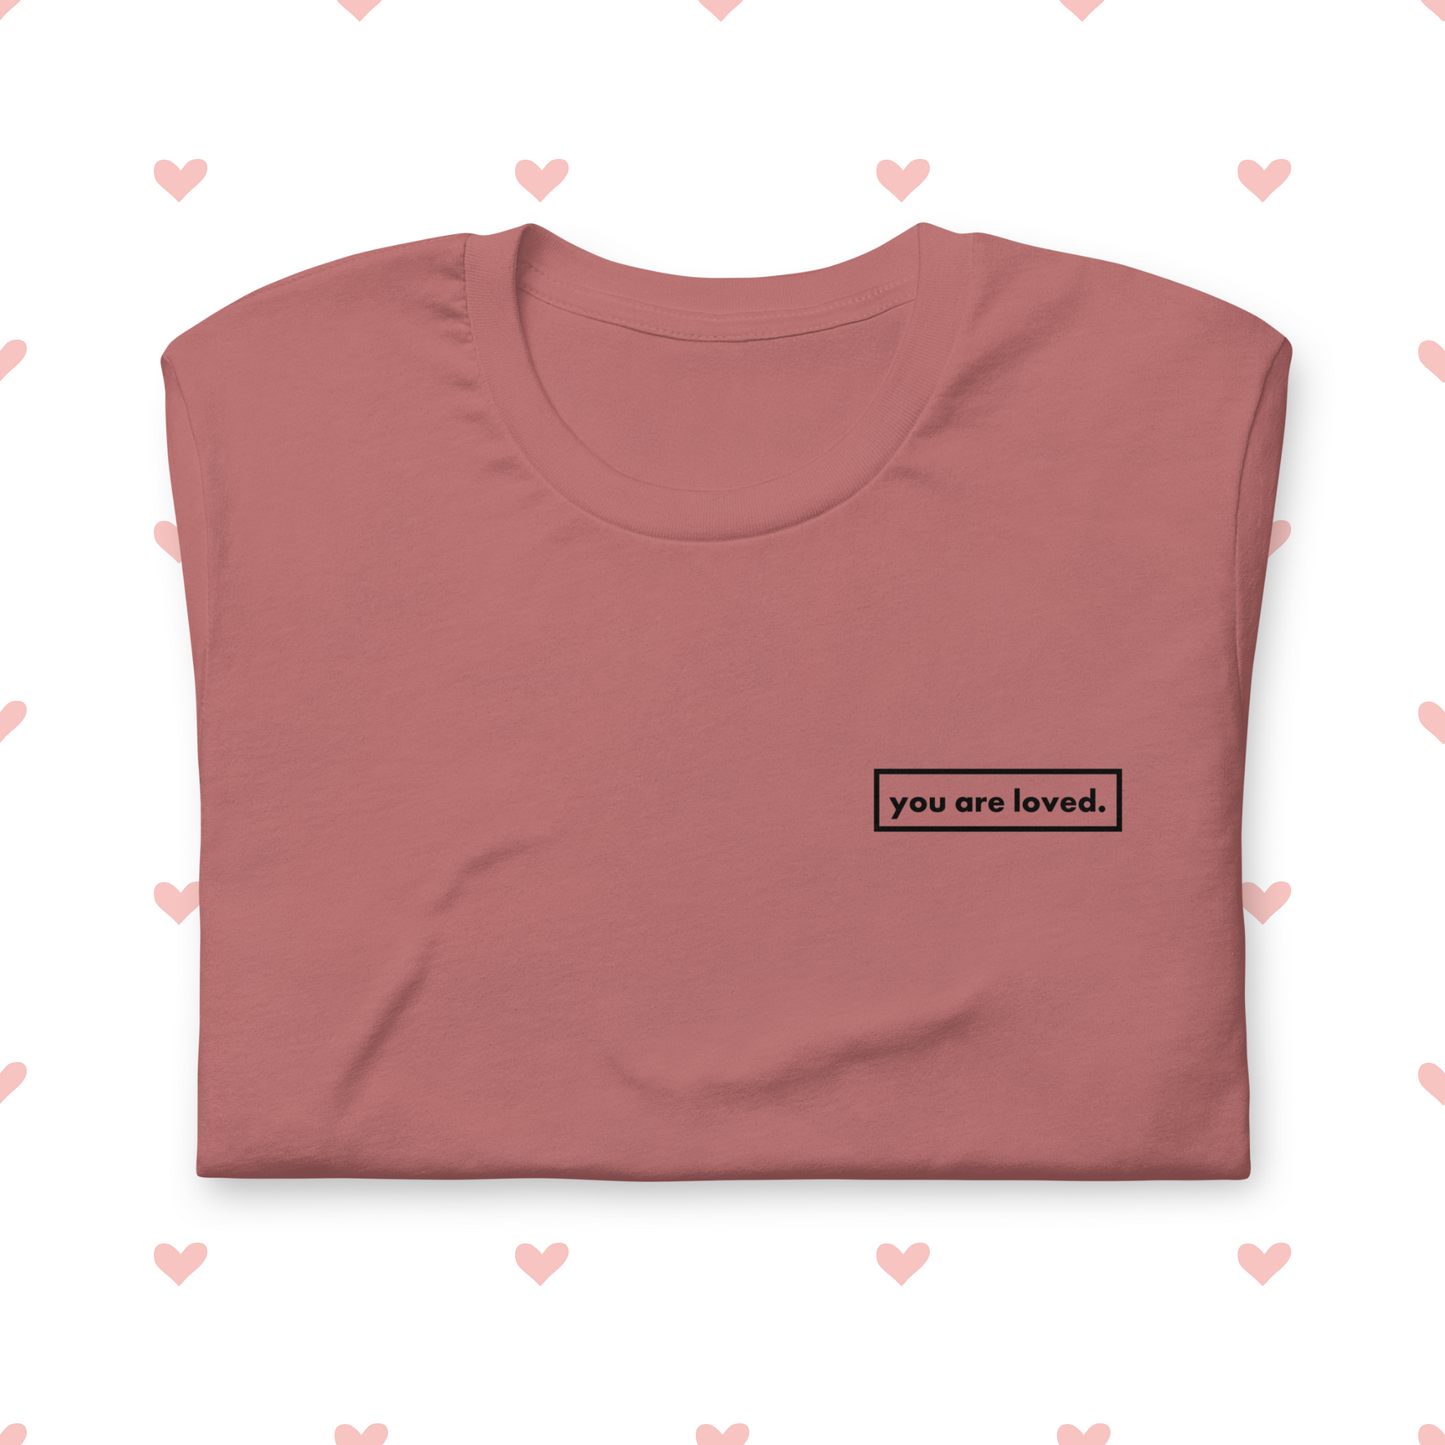 you are loved. T-shirt